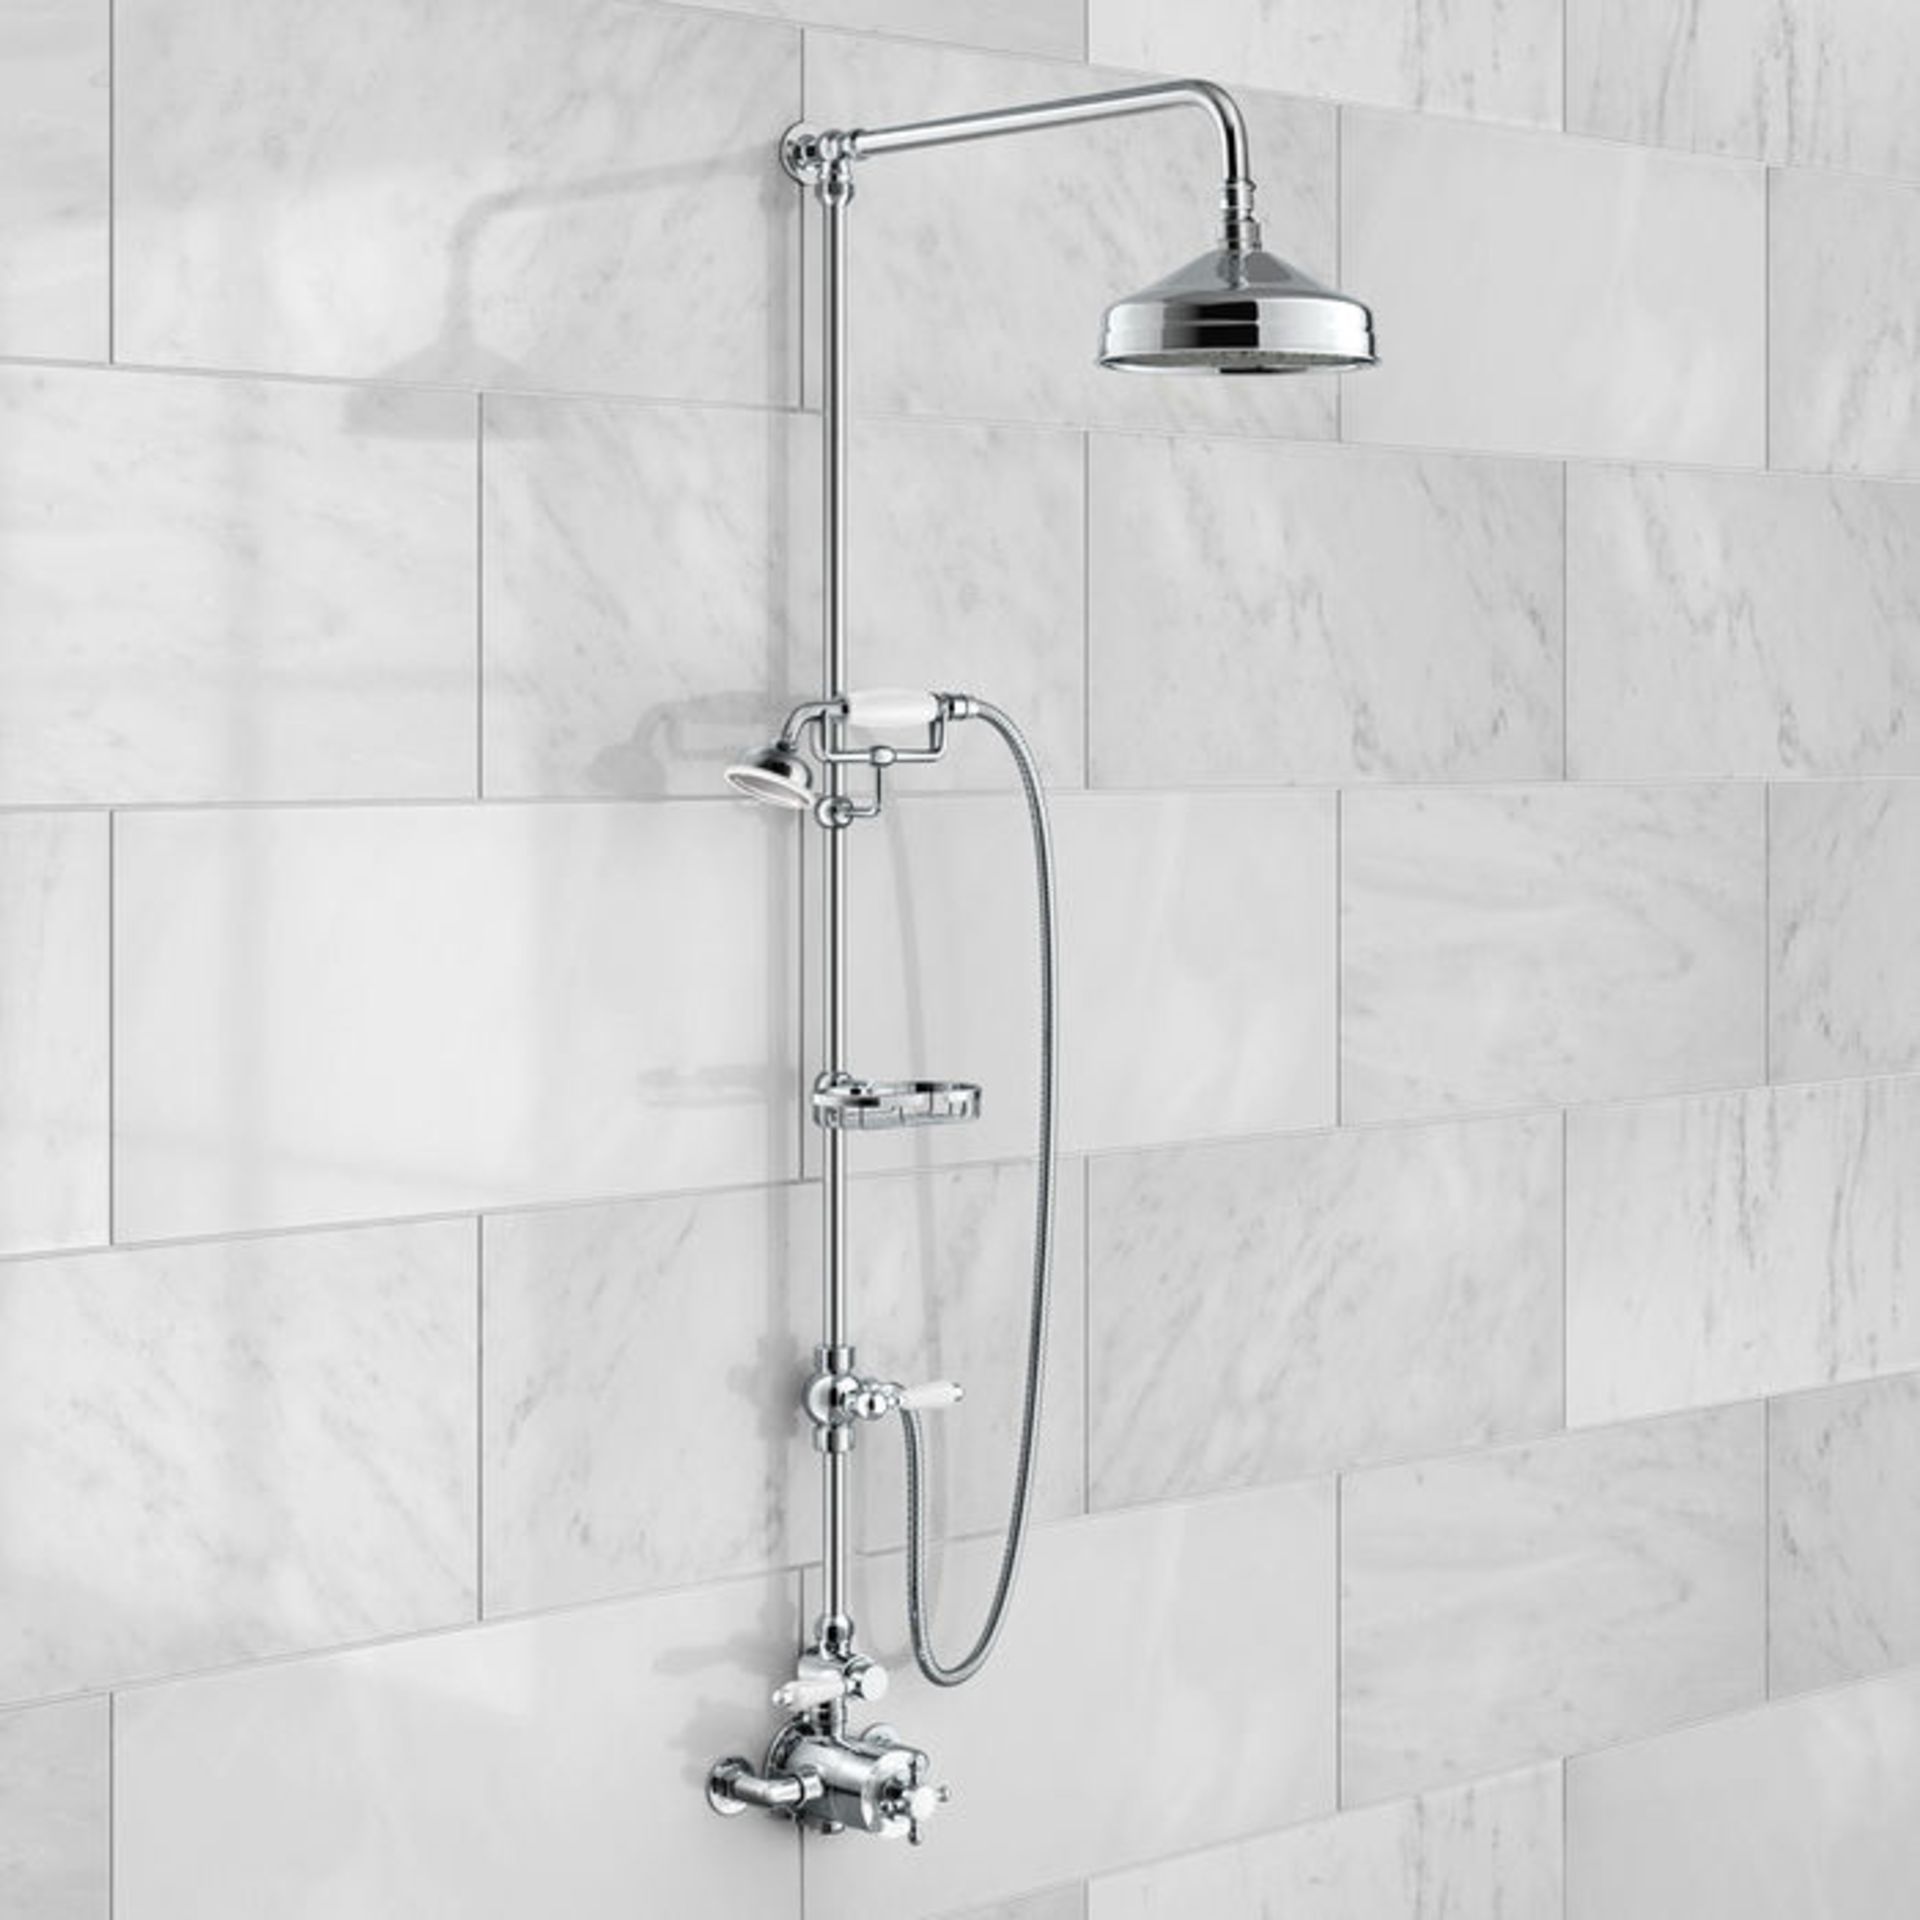 (J213) 200mm Finest Head Traditional Exposed Shower Kit, Handheld & Soap Dish. RRP £599.99. We - Image 2 of 3